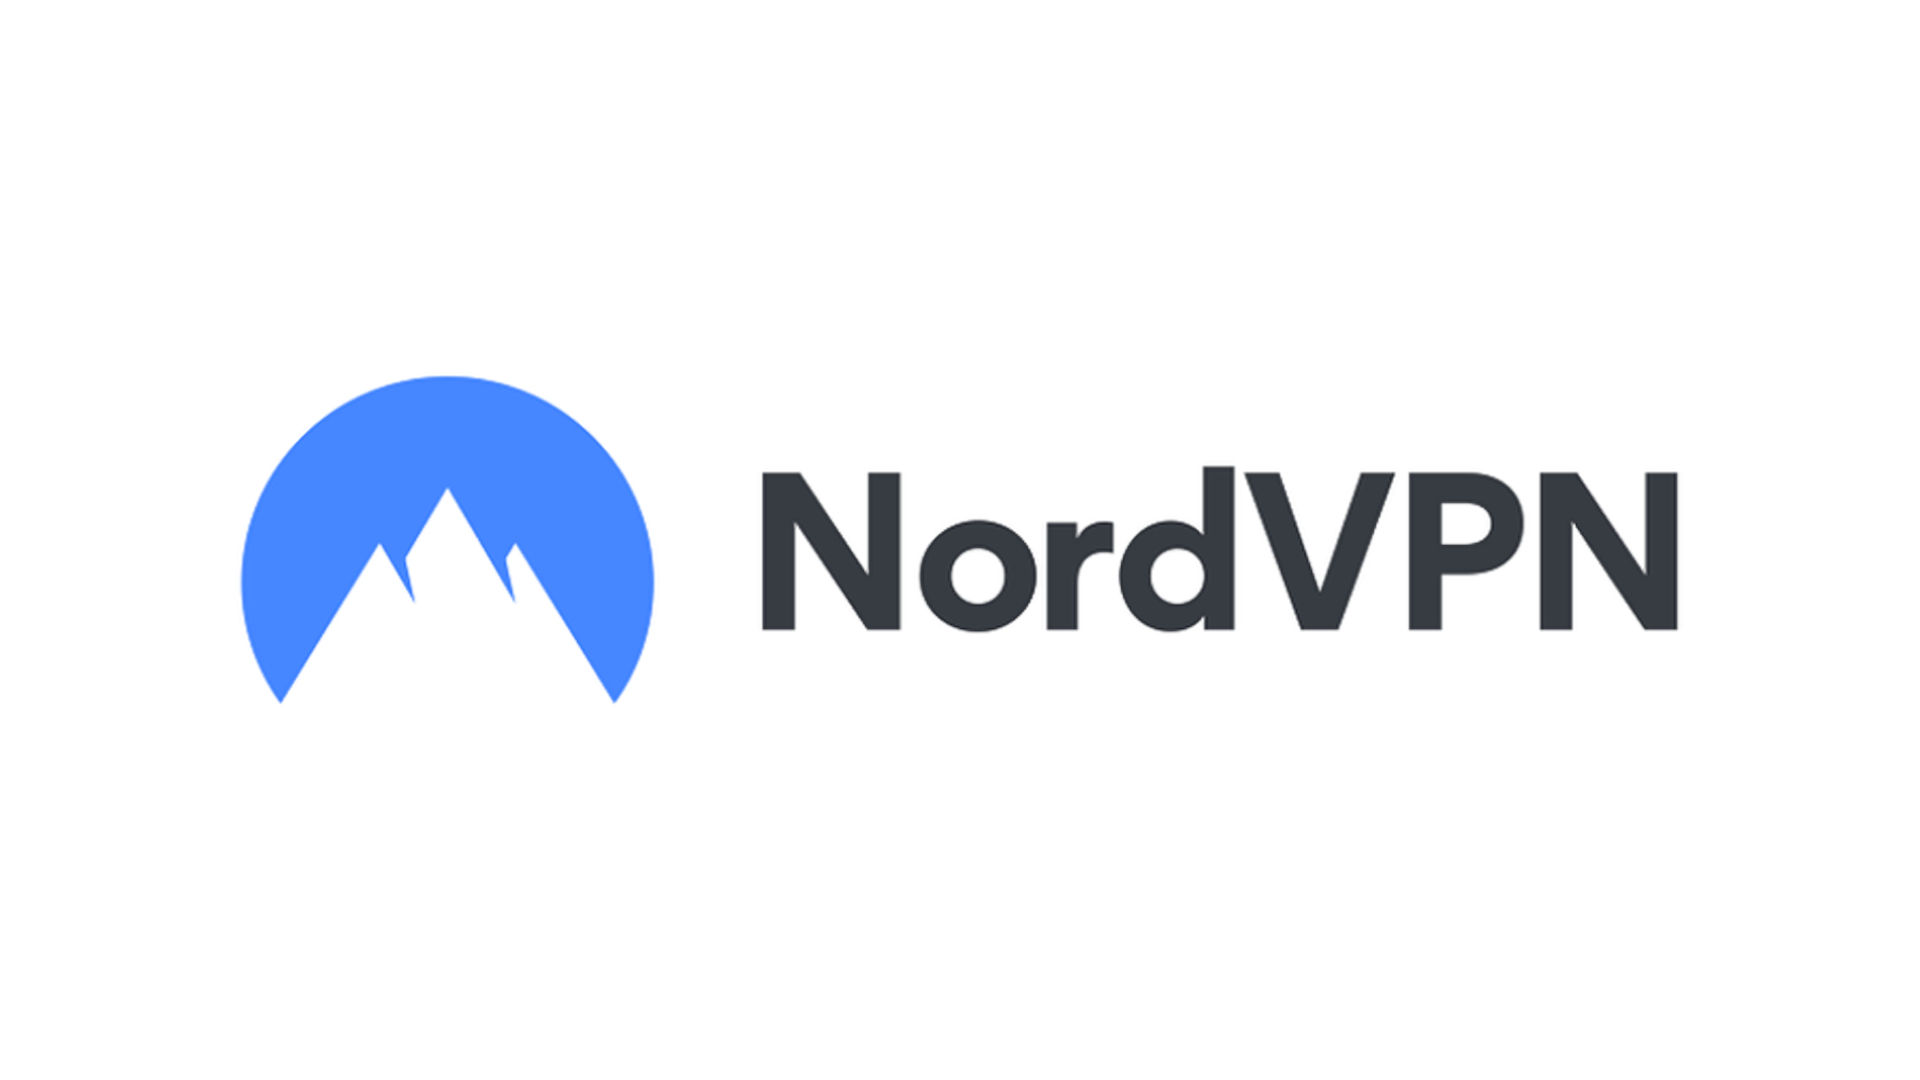 Best VPN for Android: NordVPN. Image shows the company logo.